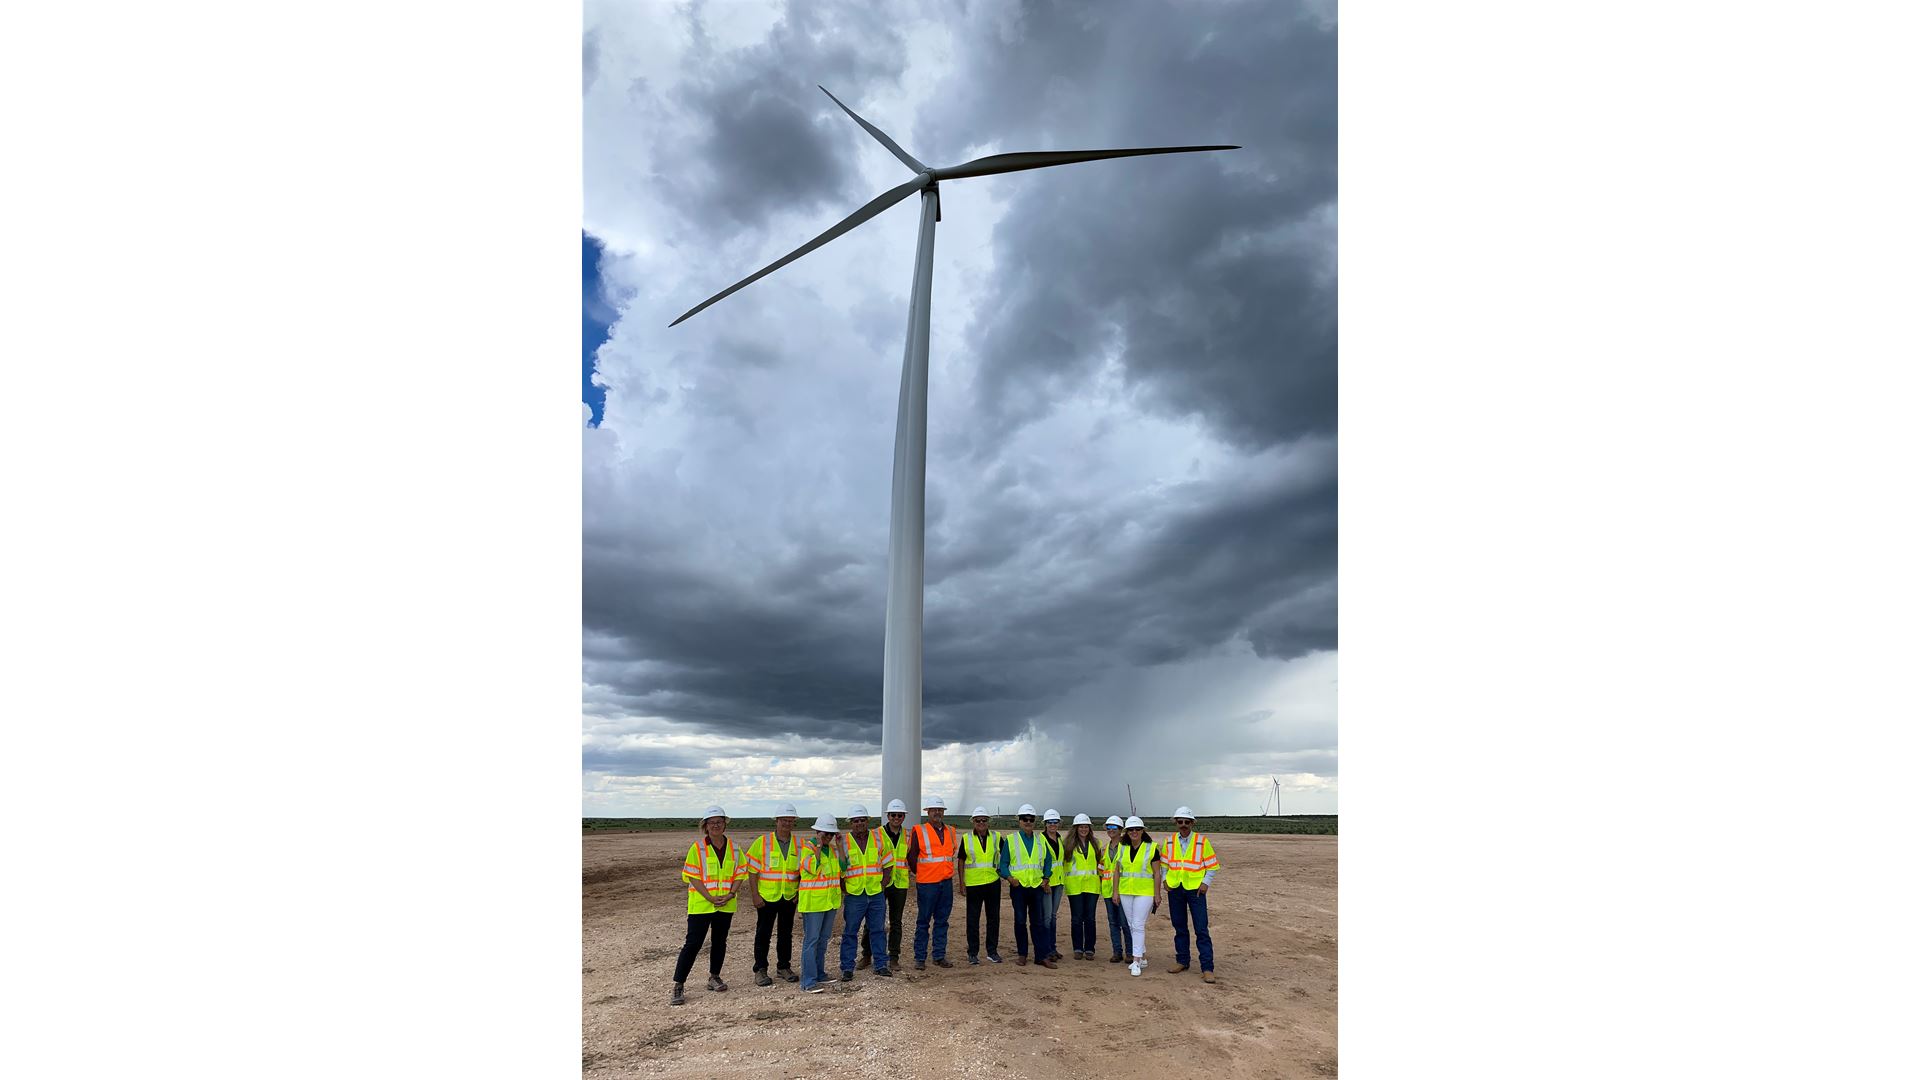 Corona Range and Livestock Research Center field day to highlight research, wind farm